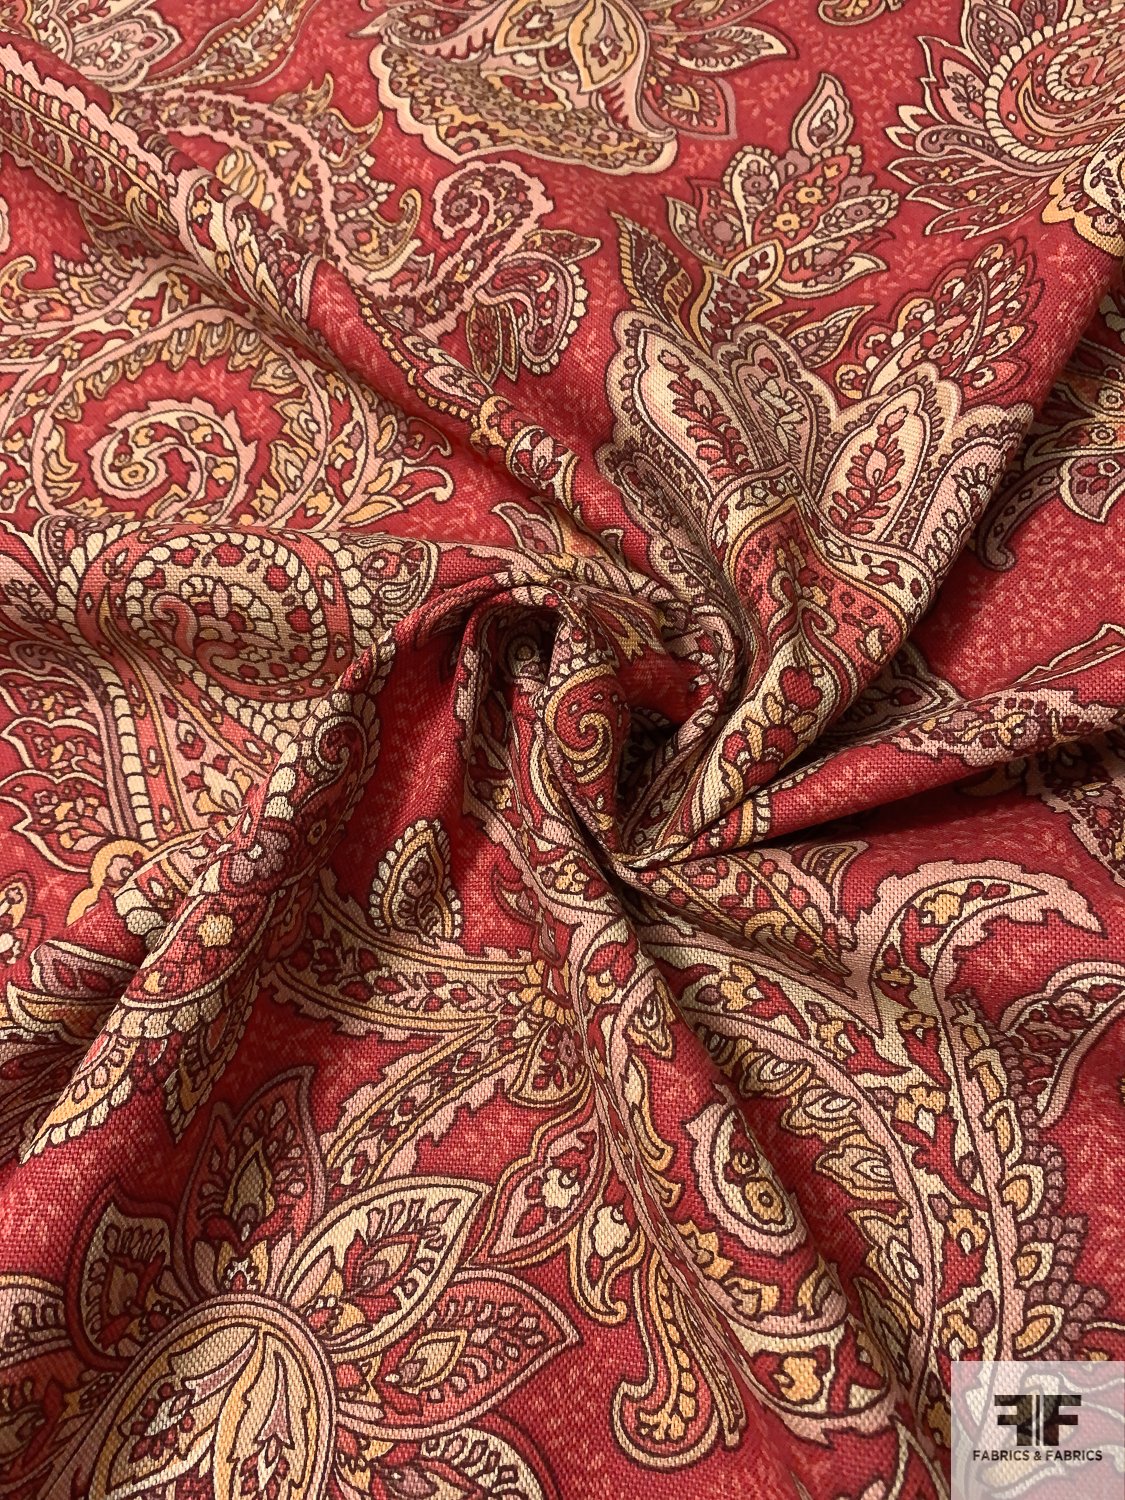 Ornate Paisley Printed Cotton-Linen - Cranberry / Tans / Yellow